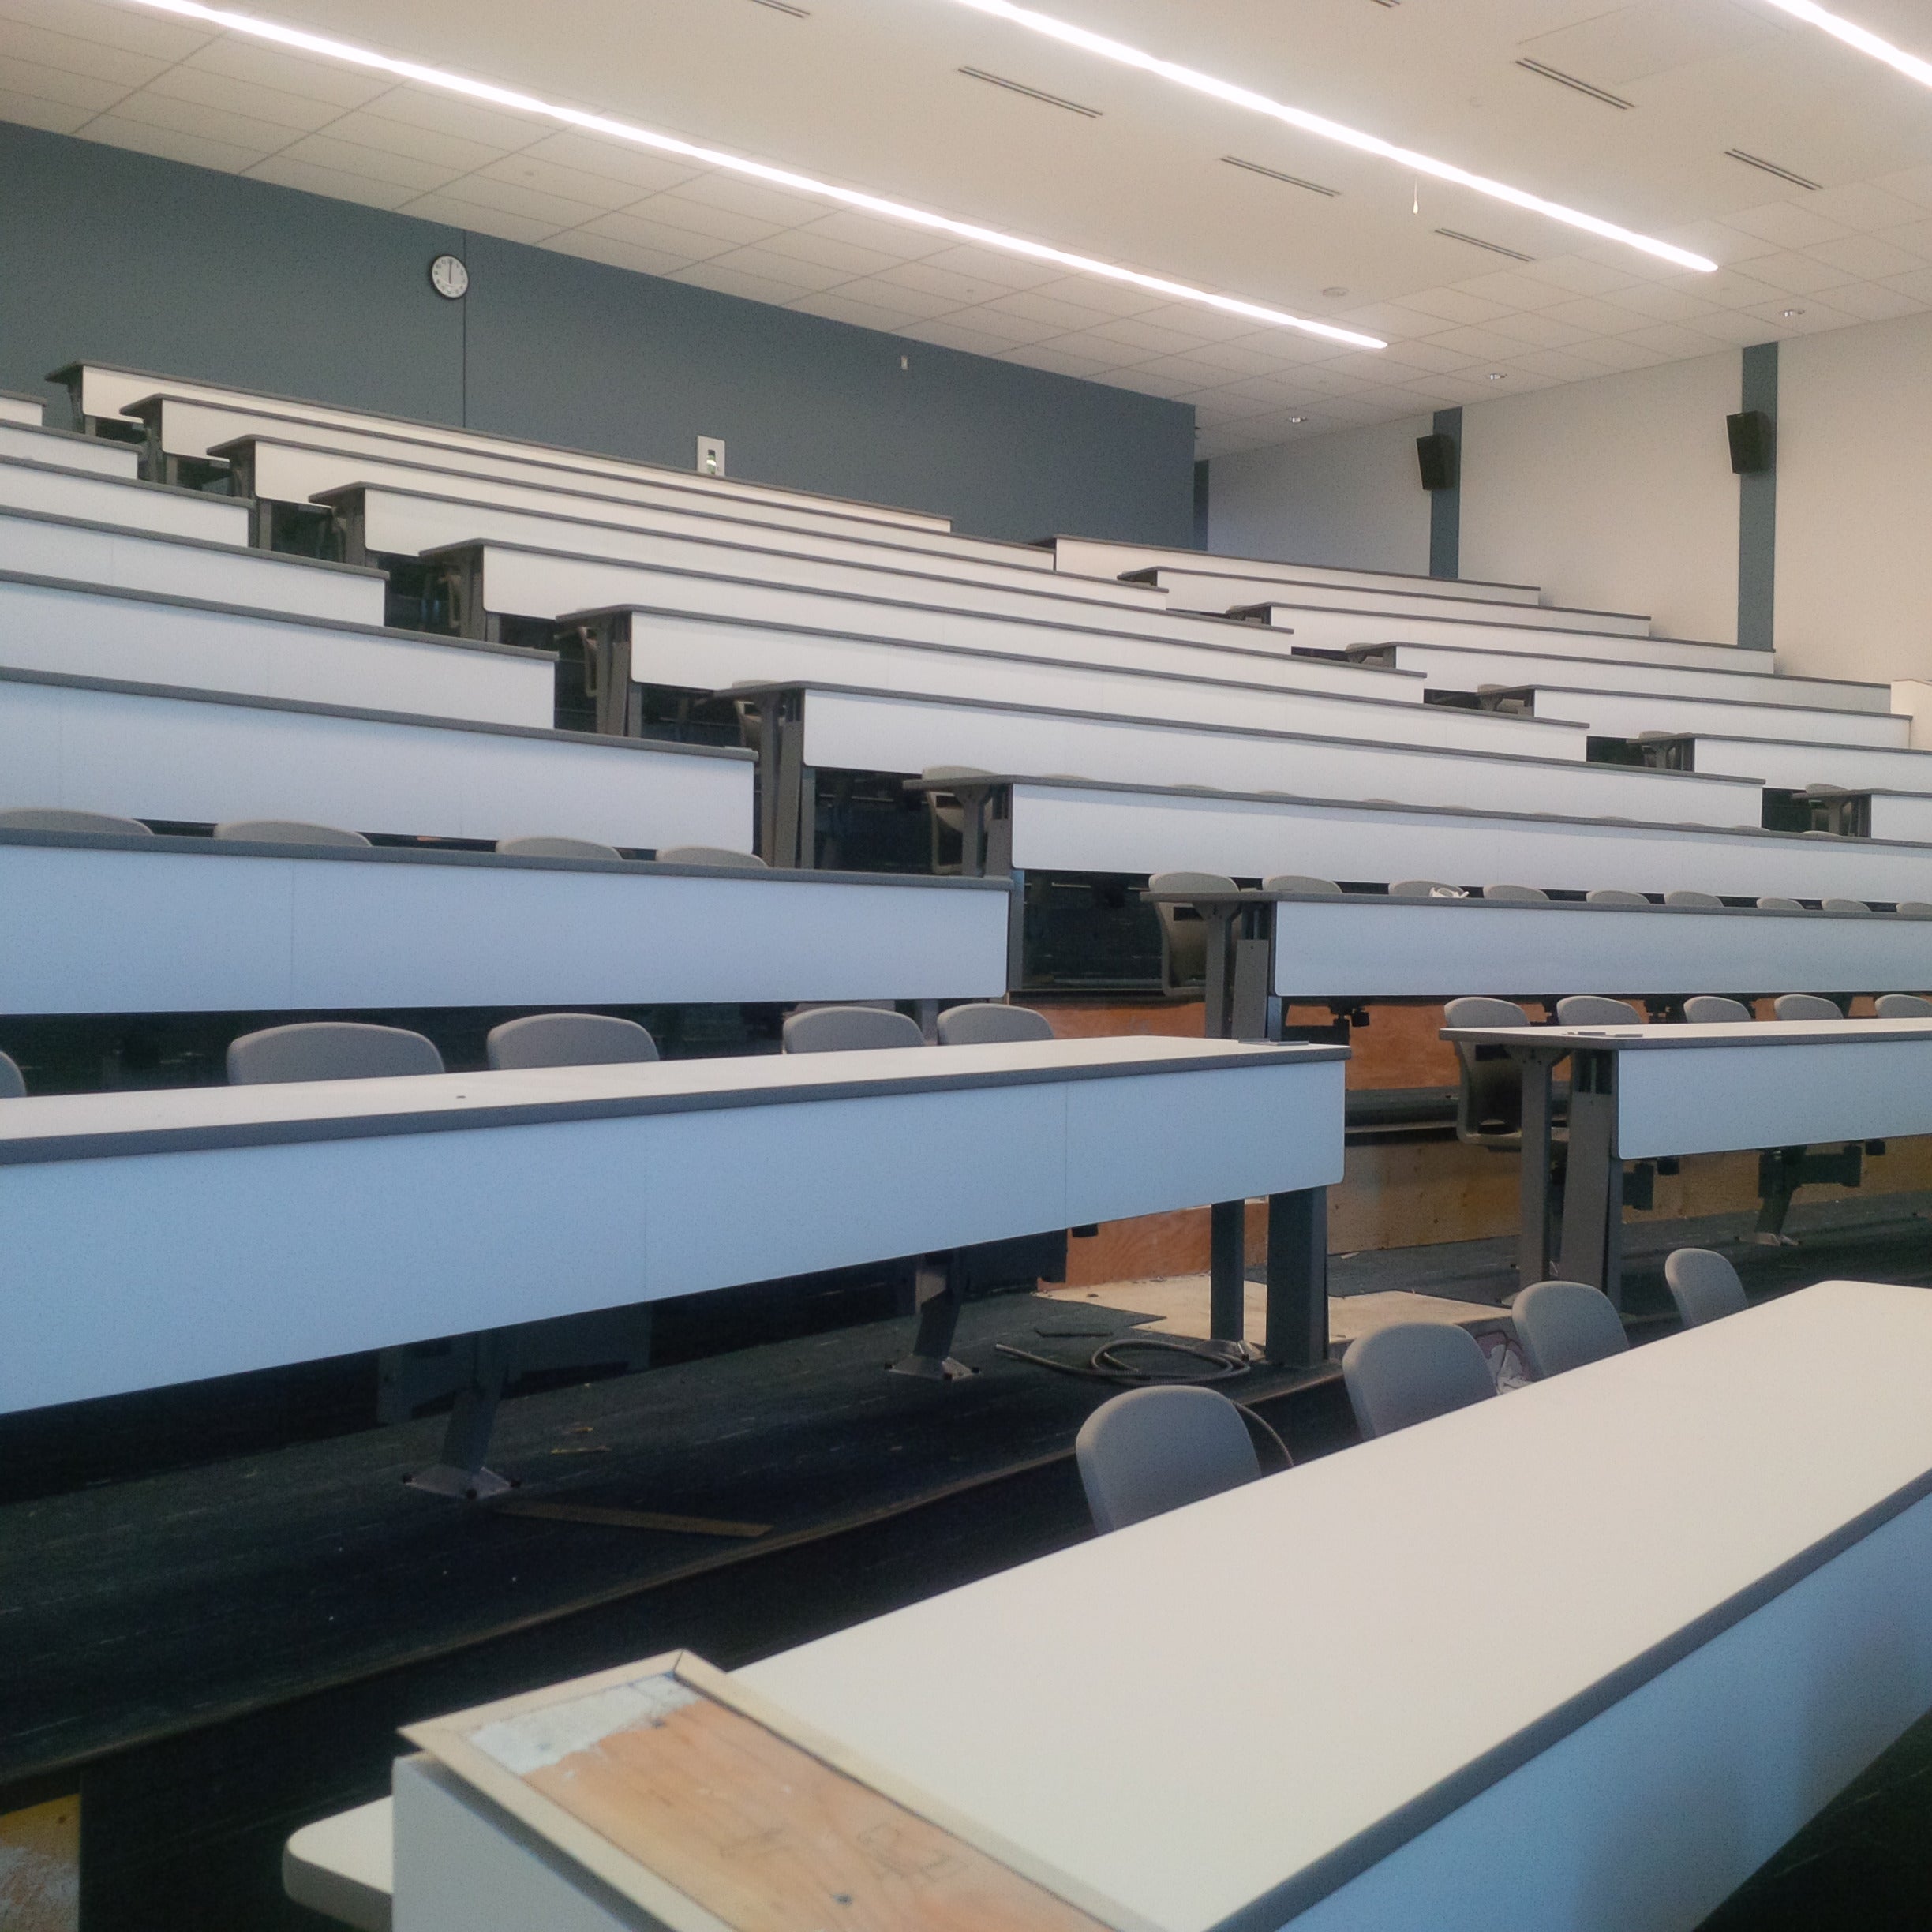 Lecture hall construction.